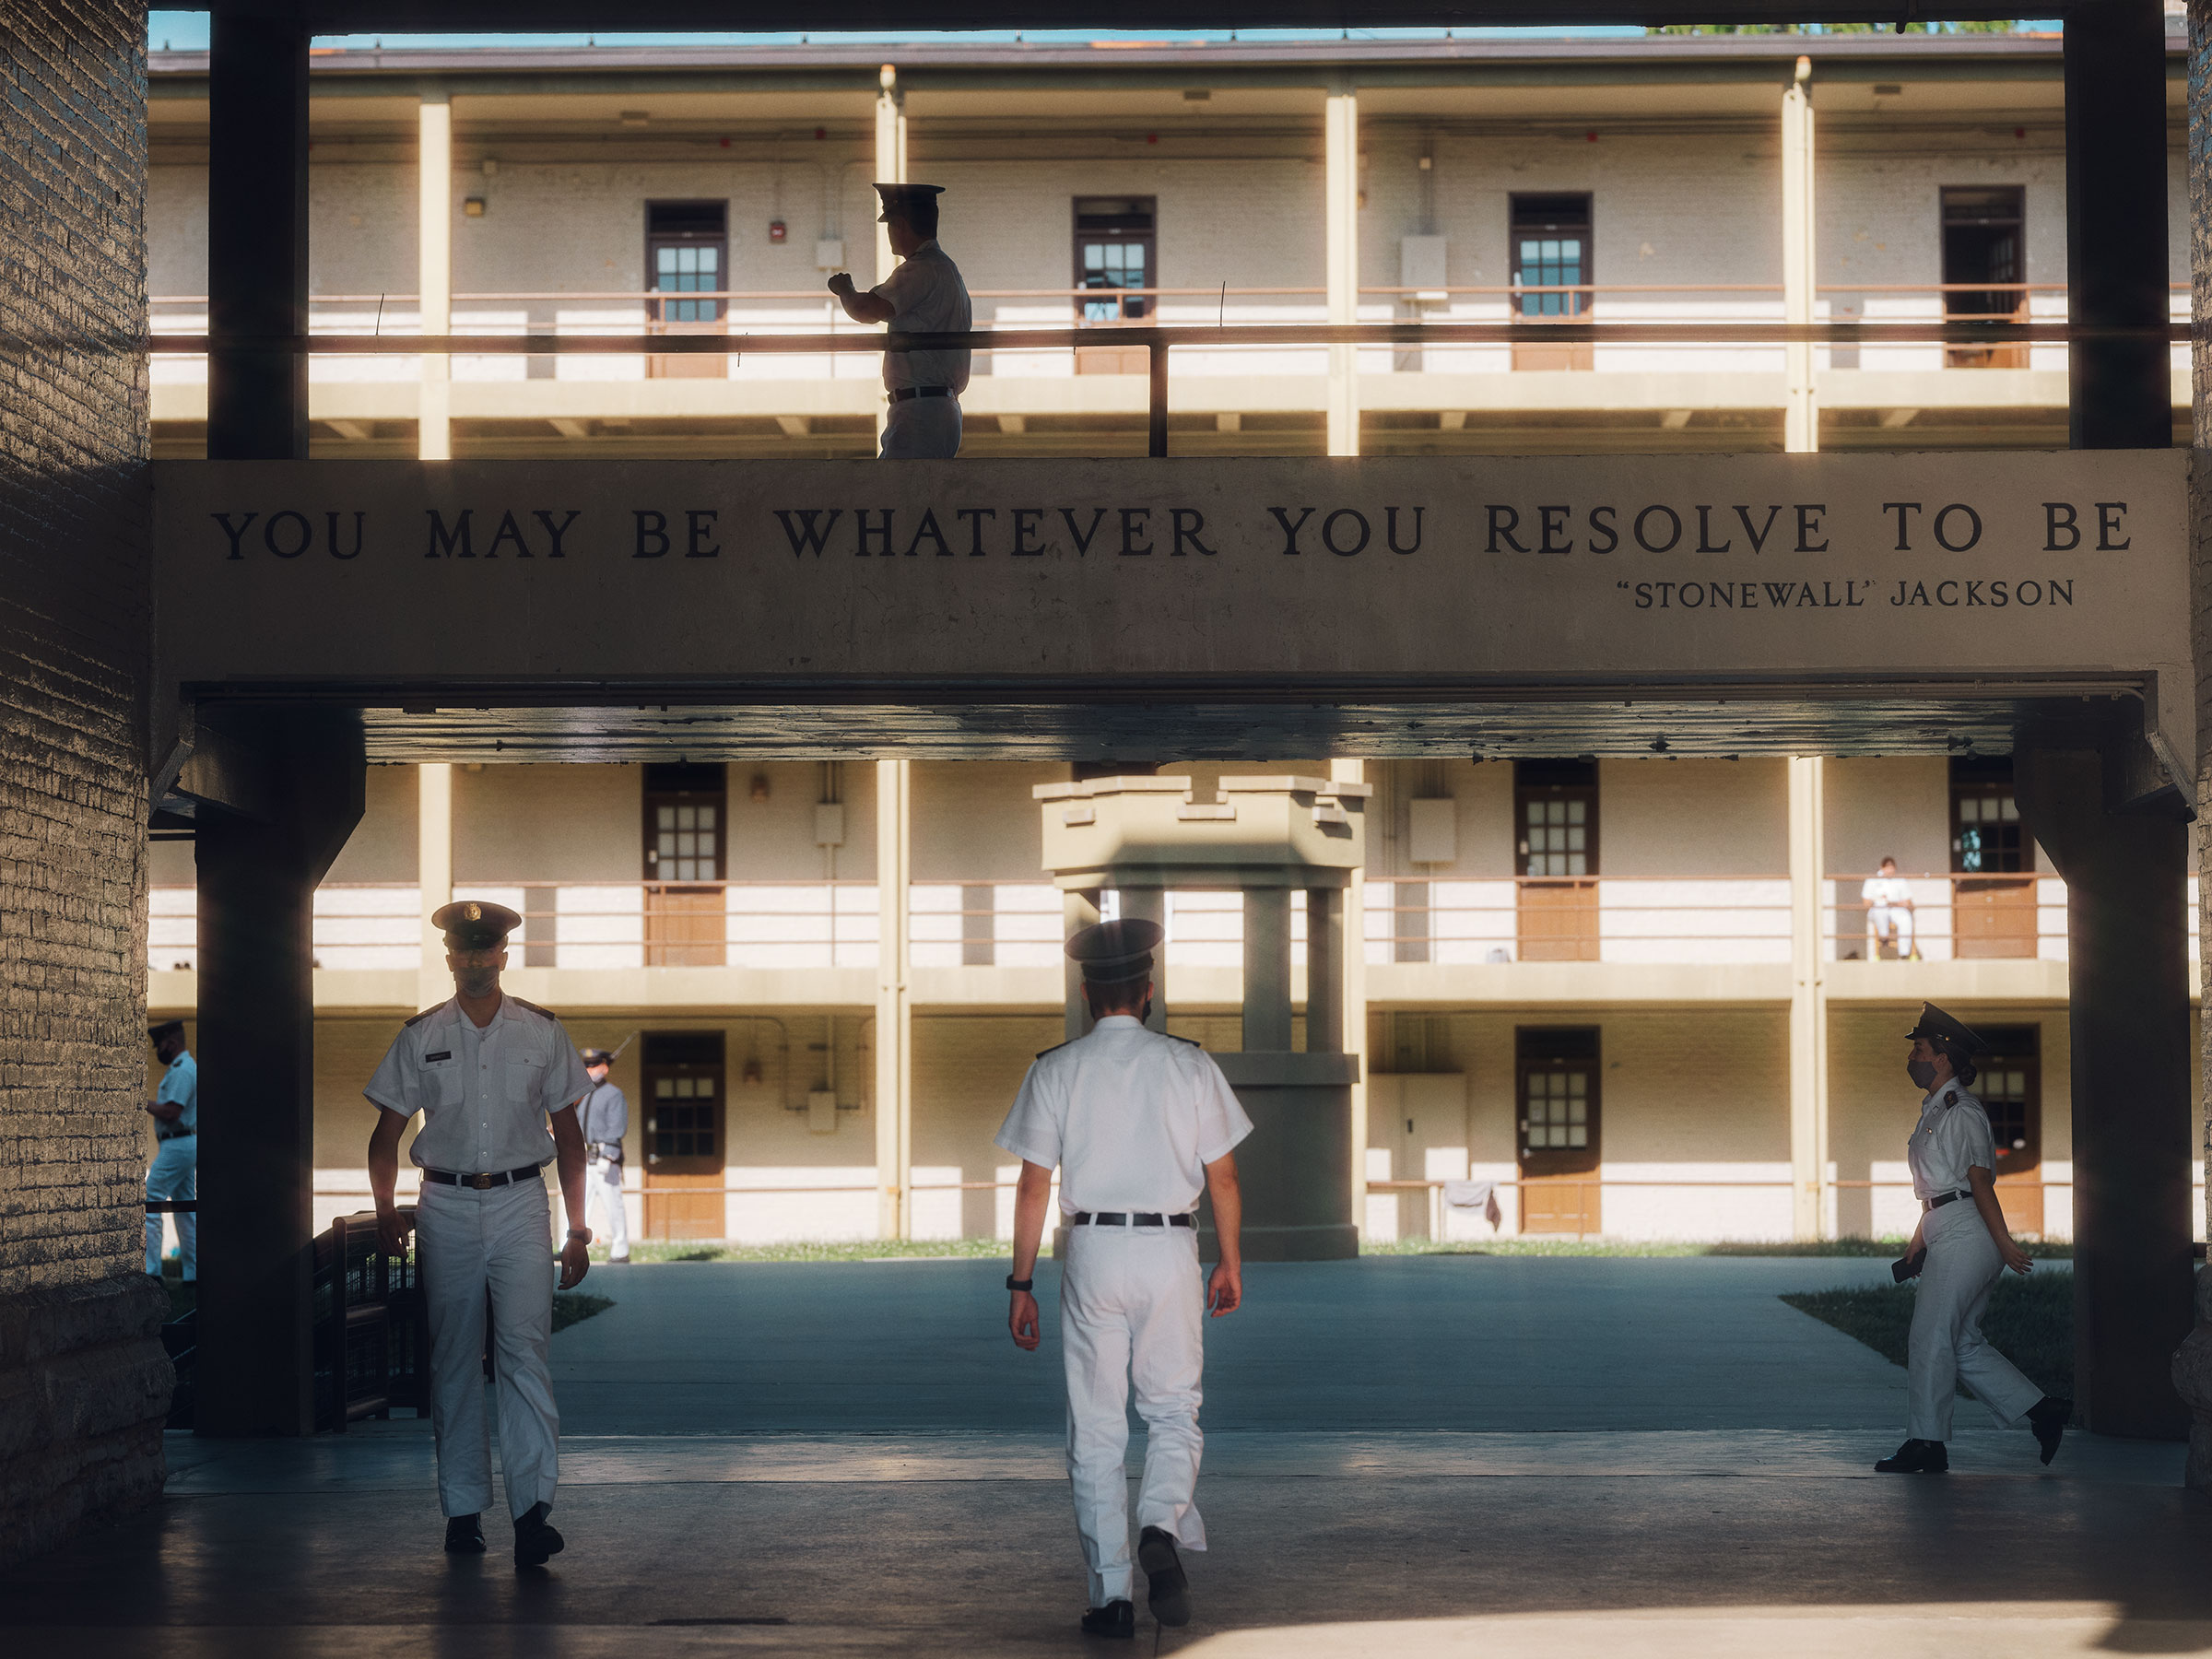 VMI’s board voted in May to strip Jackson’s name from the mantra adorning the barracks.